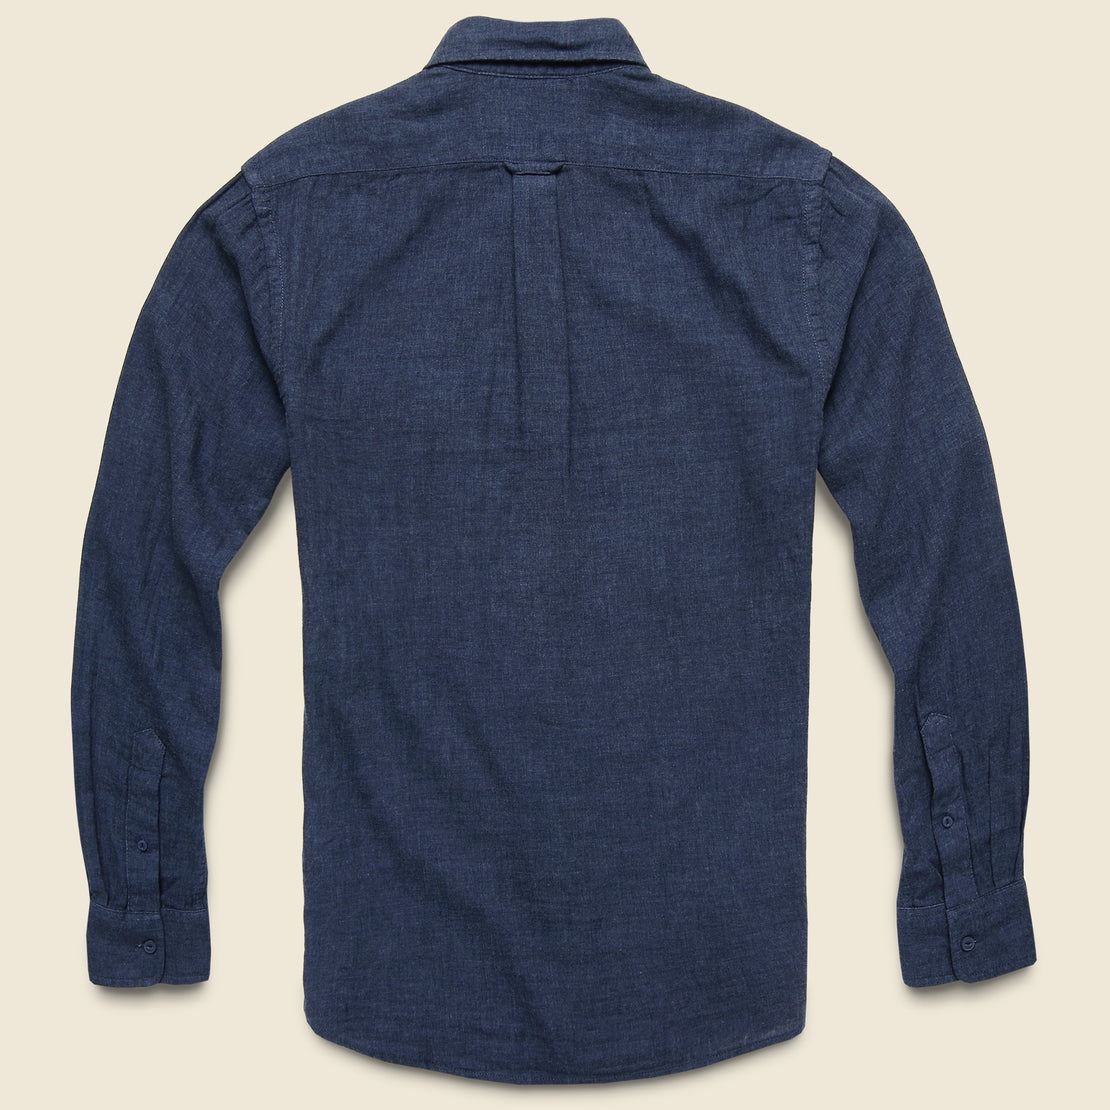 Hattox Double Cloth Shirt - Navy Heather - Grayers - STAG Provisions - Tops - L/S Woven - Solid